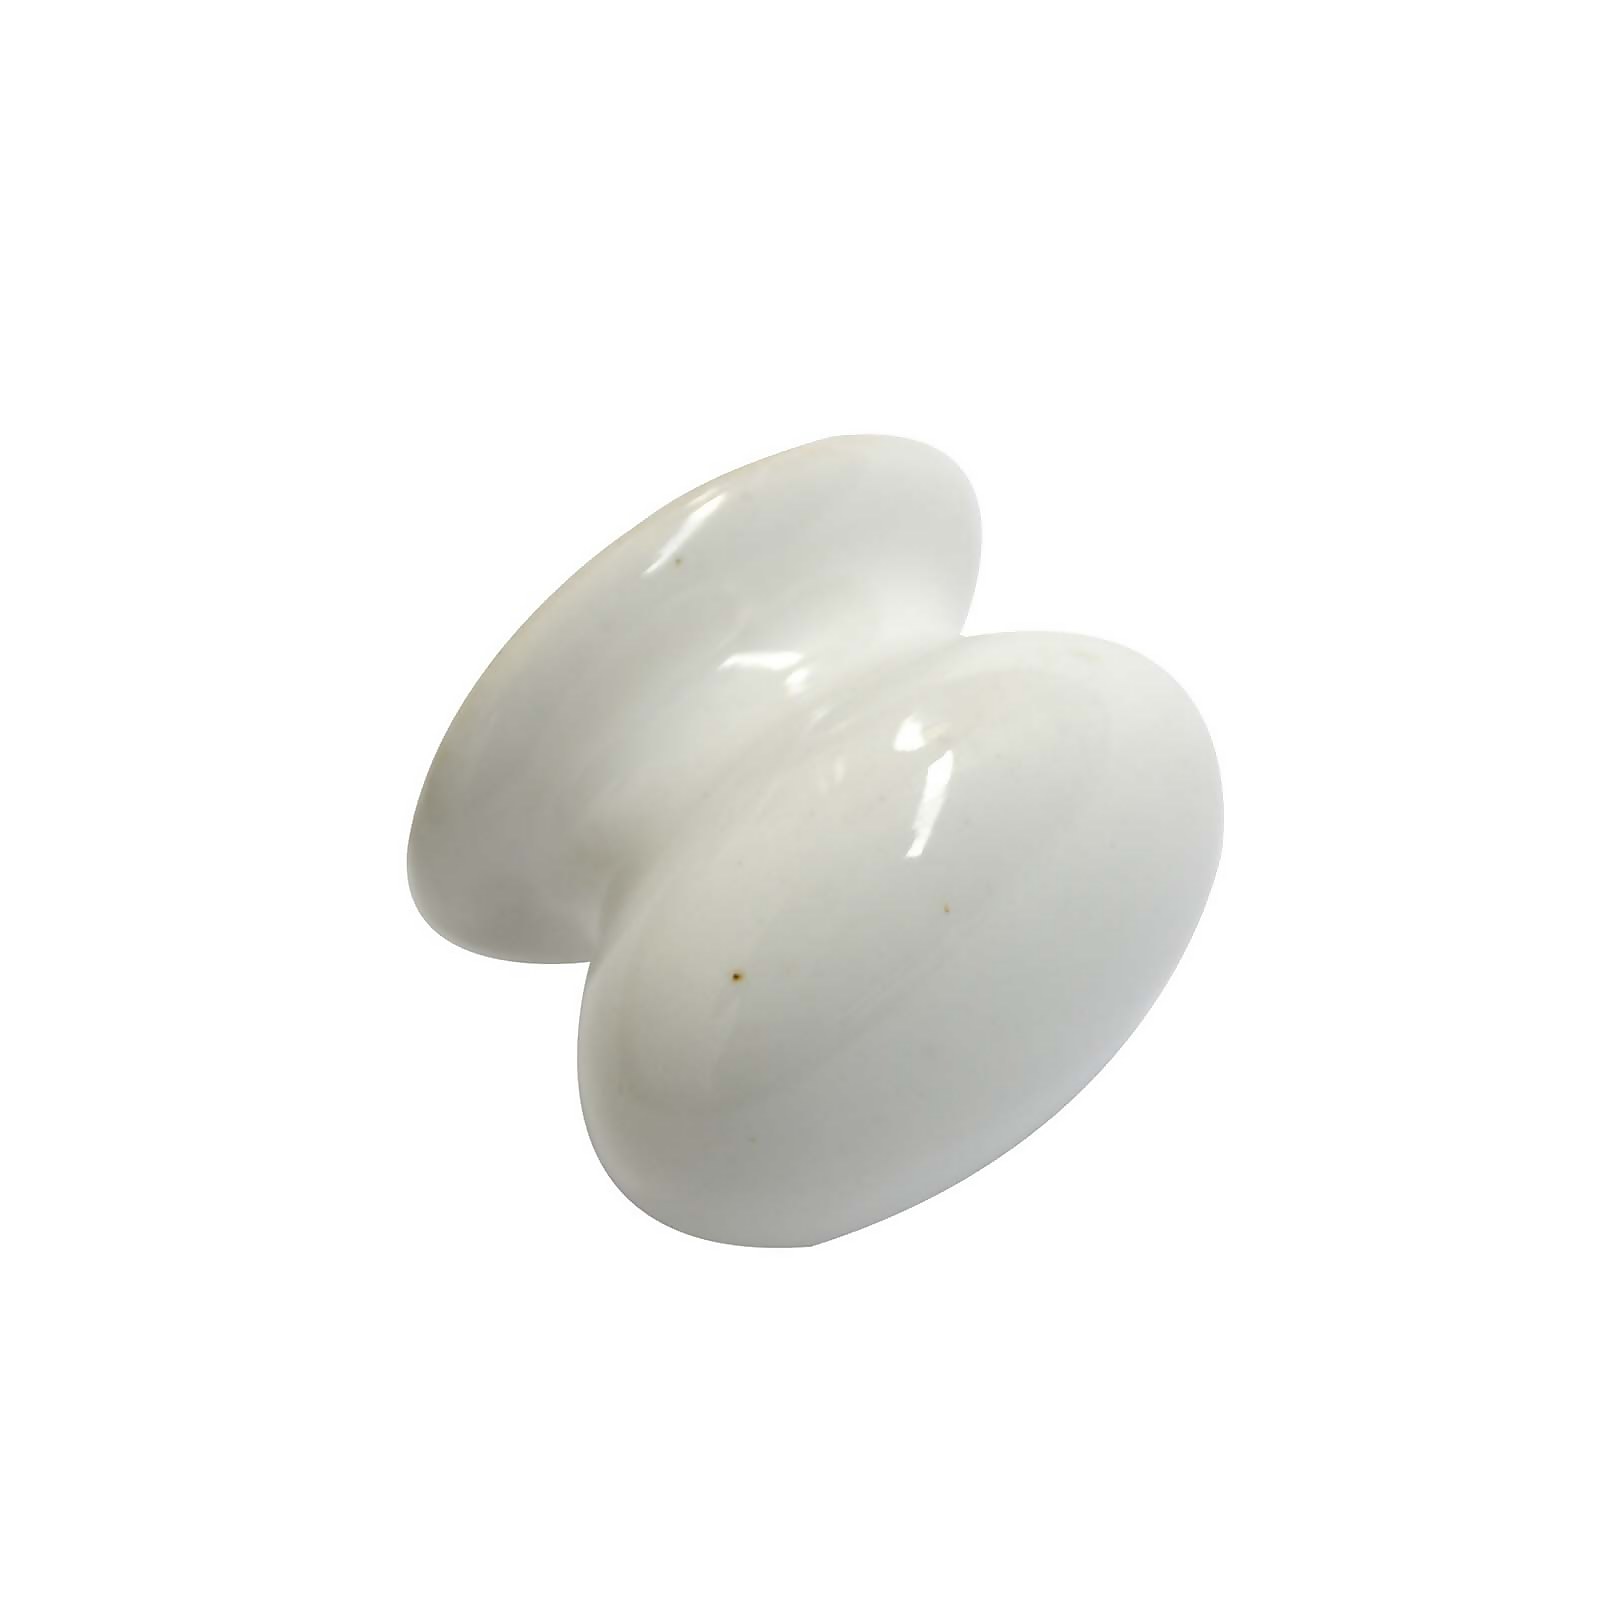 Photo of Porcelain 50mm White Cabinet Knob - 6 Pack